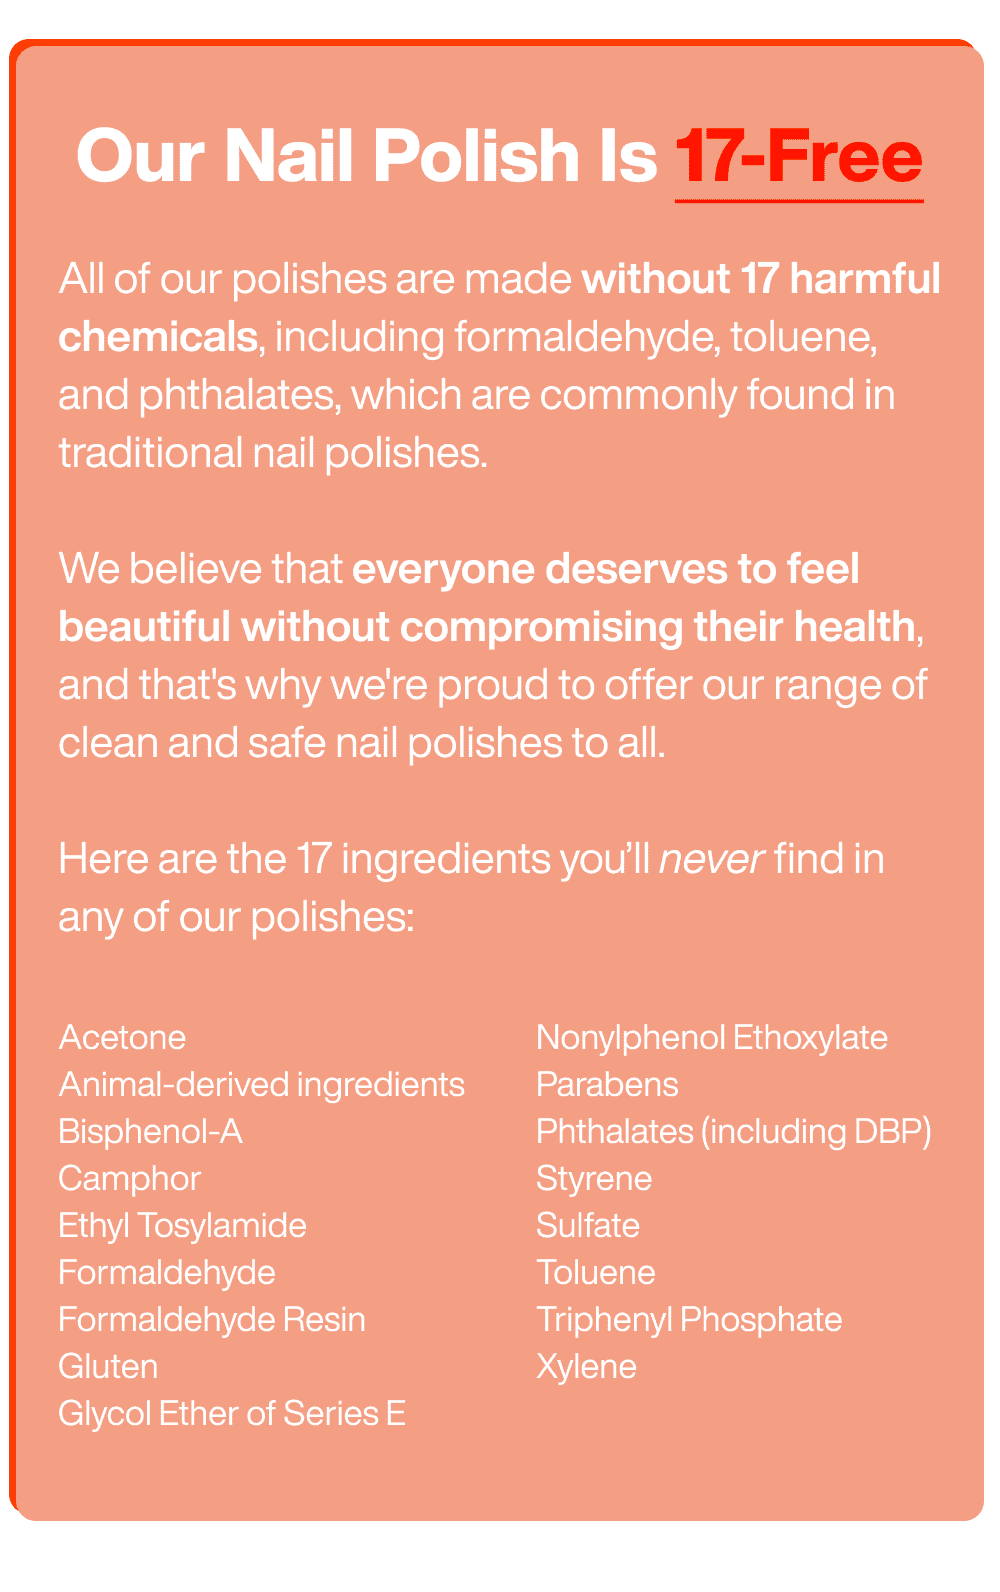 Our Nail Polish Is 17-Free